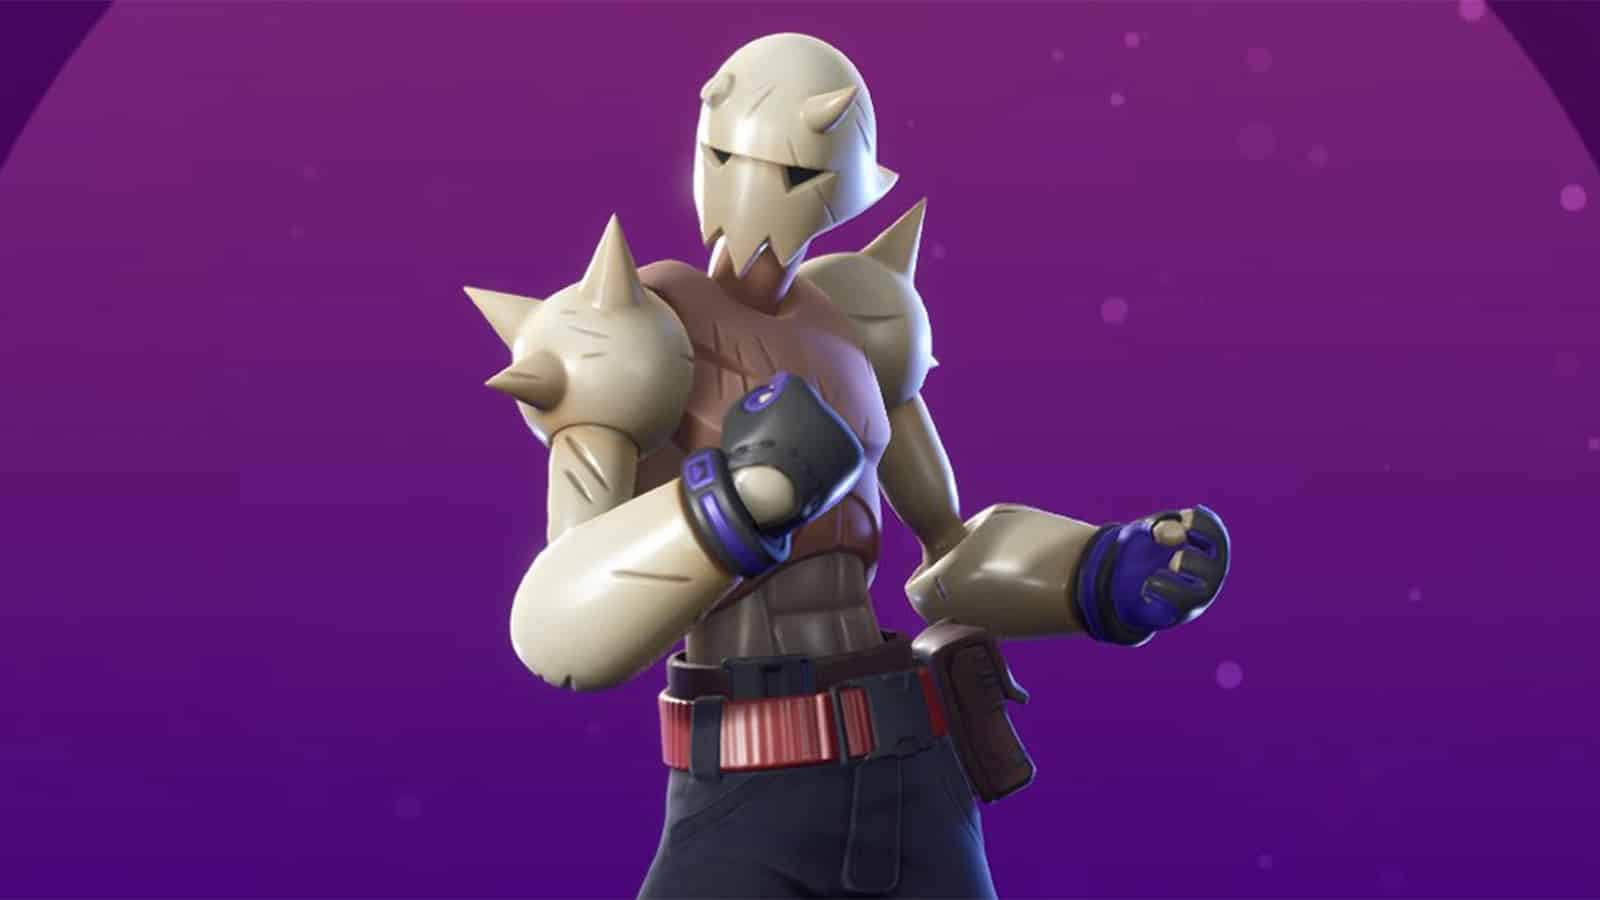 Snap skin with styles in the Fortnite 21.10 update